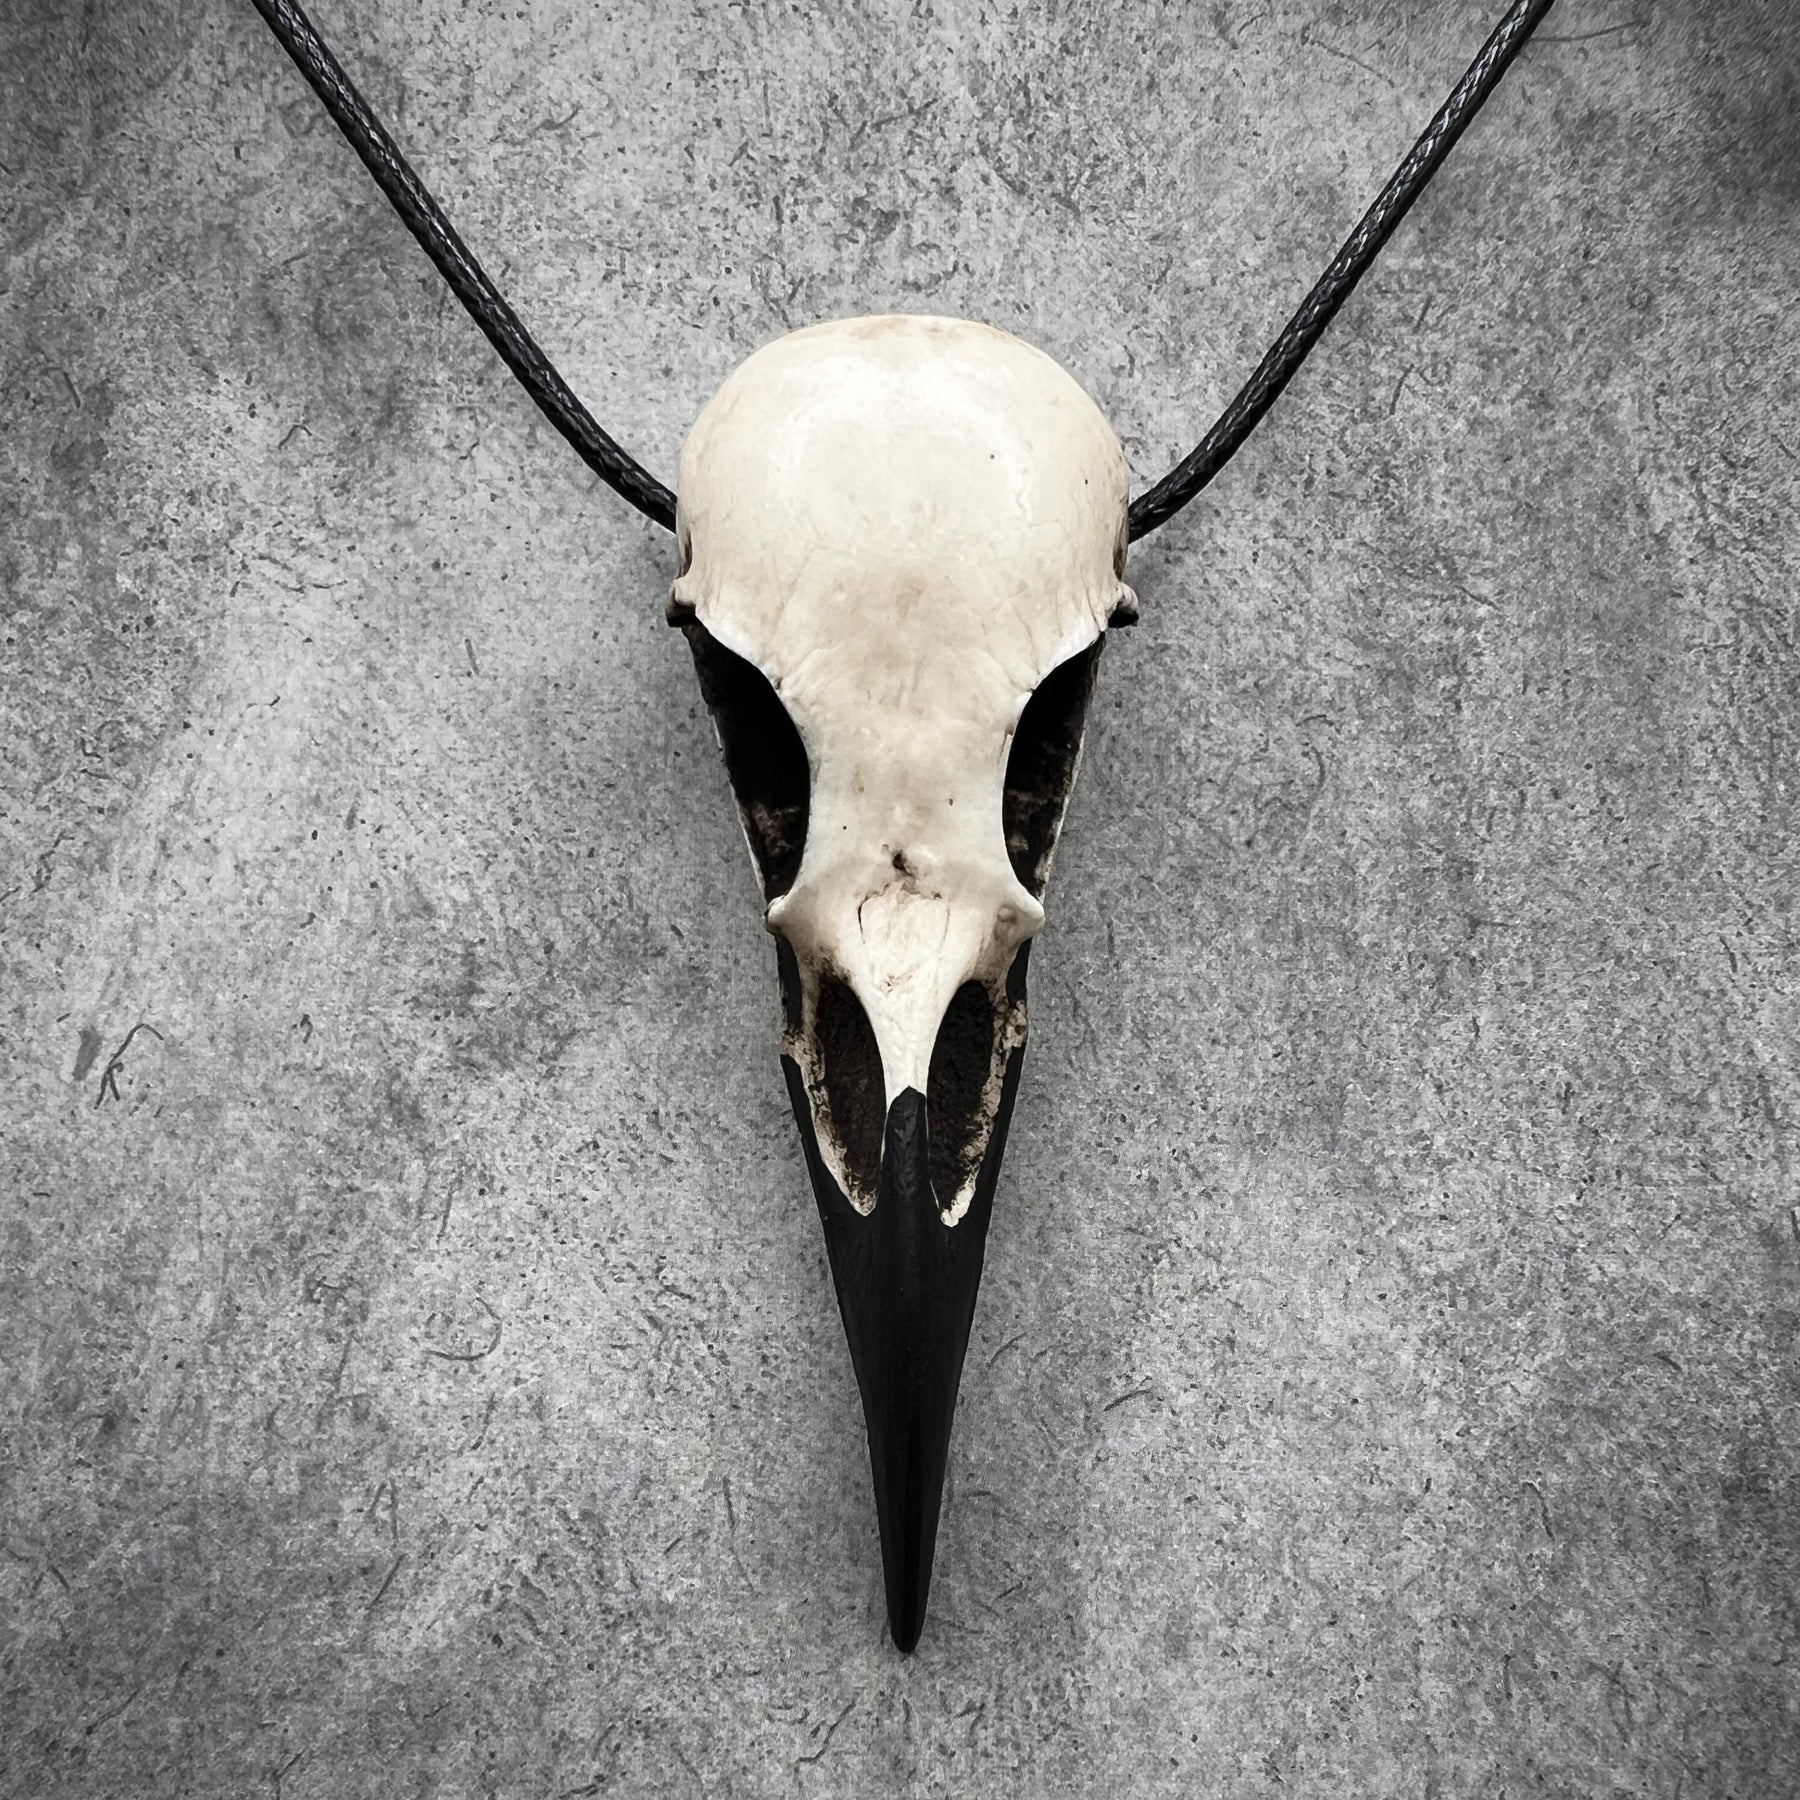 Animal skull jewelry bone clone cast resin replica of a real raven. Bird skull necklaces and raven skull pendants for goth and witchy women